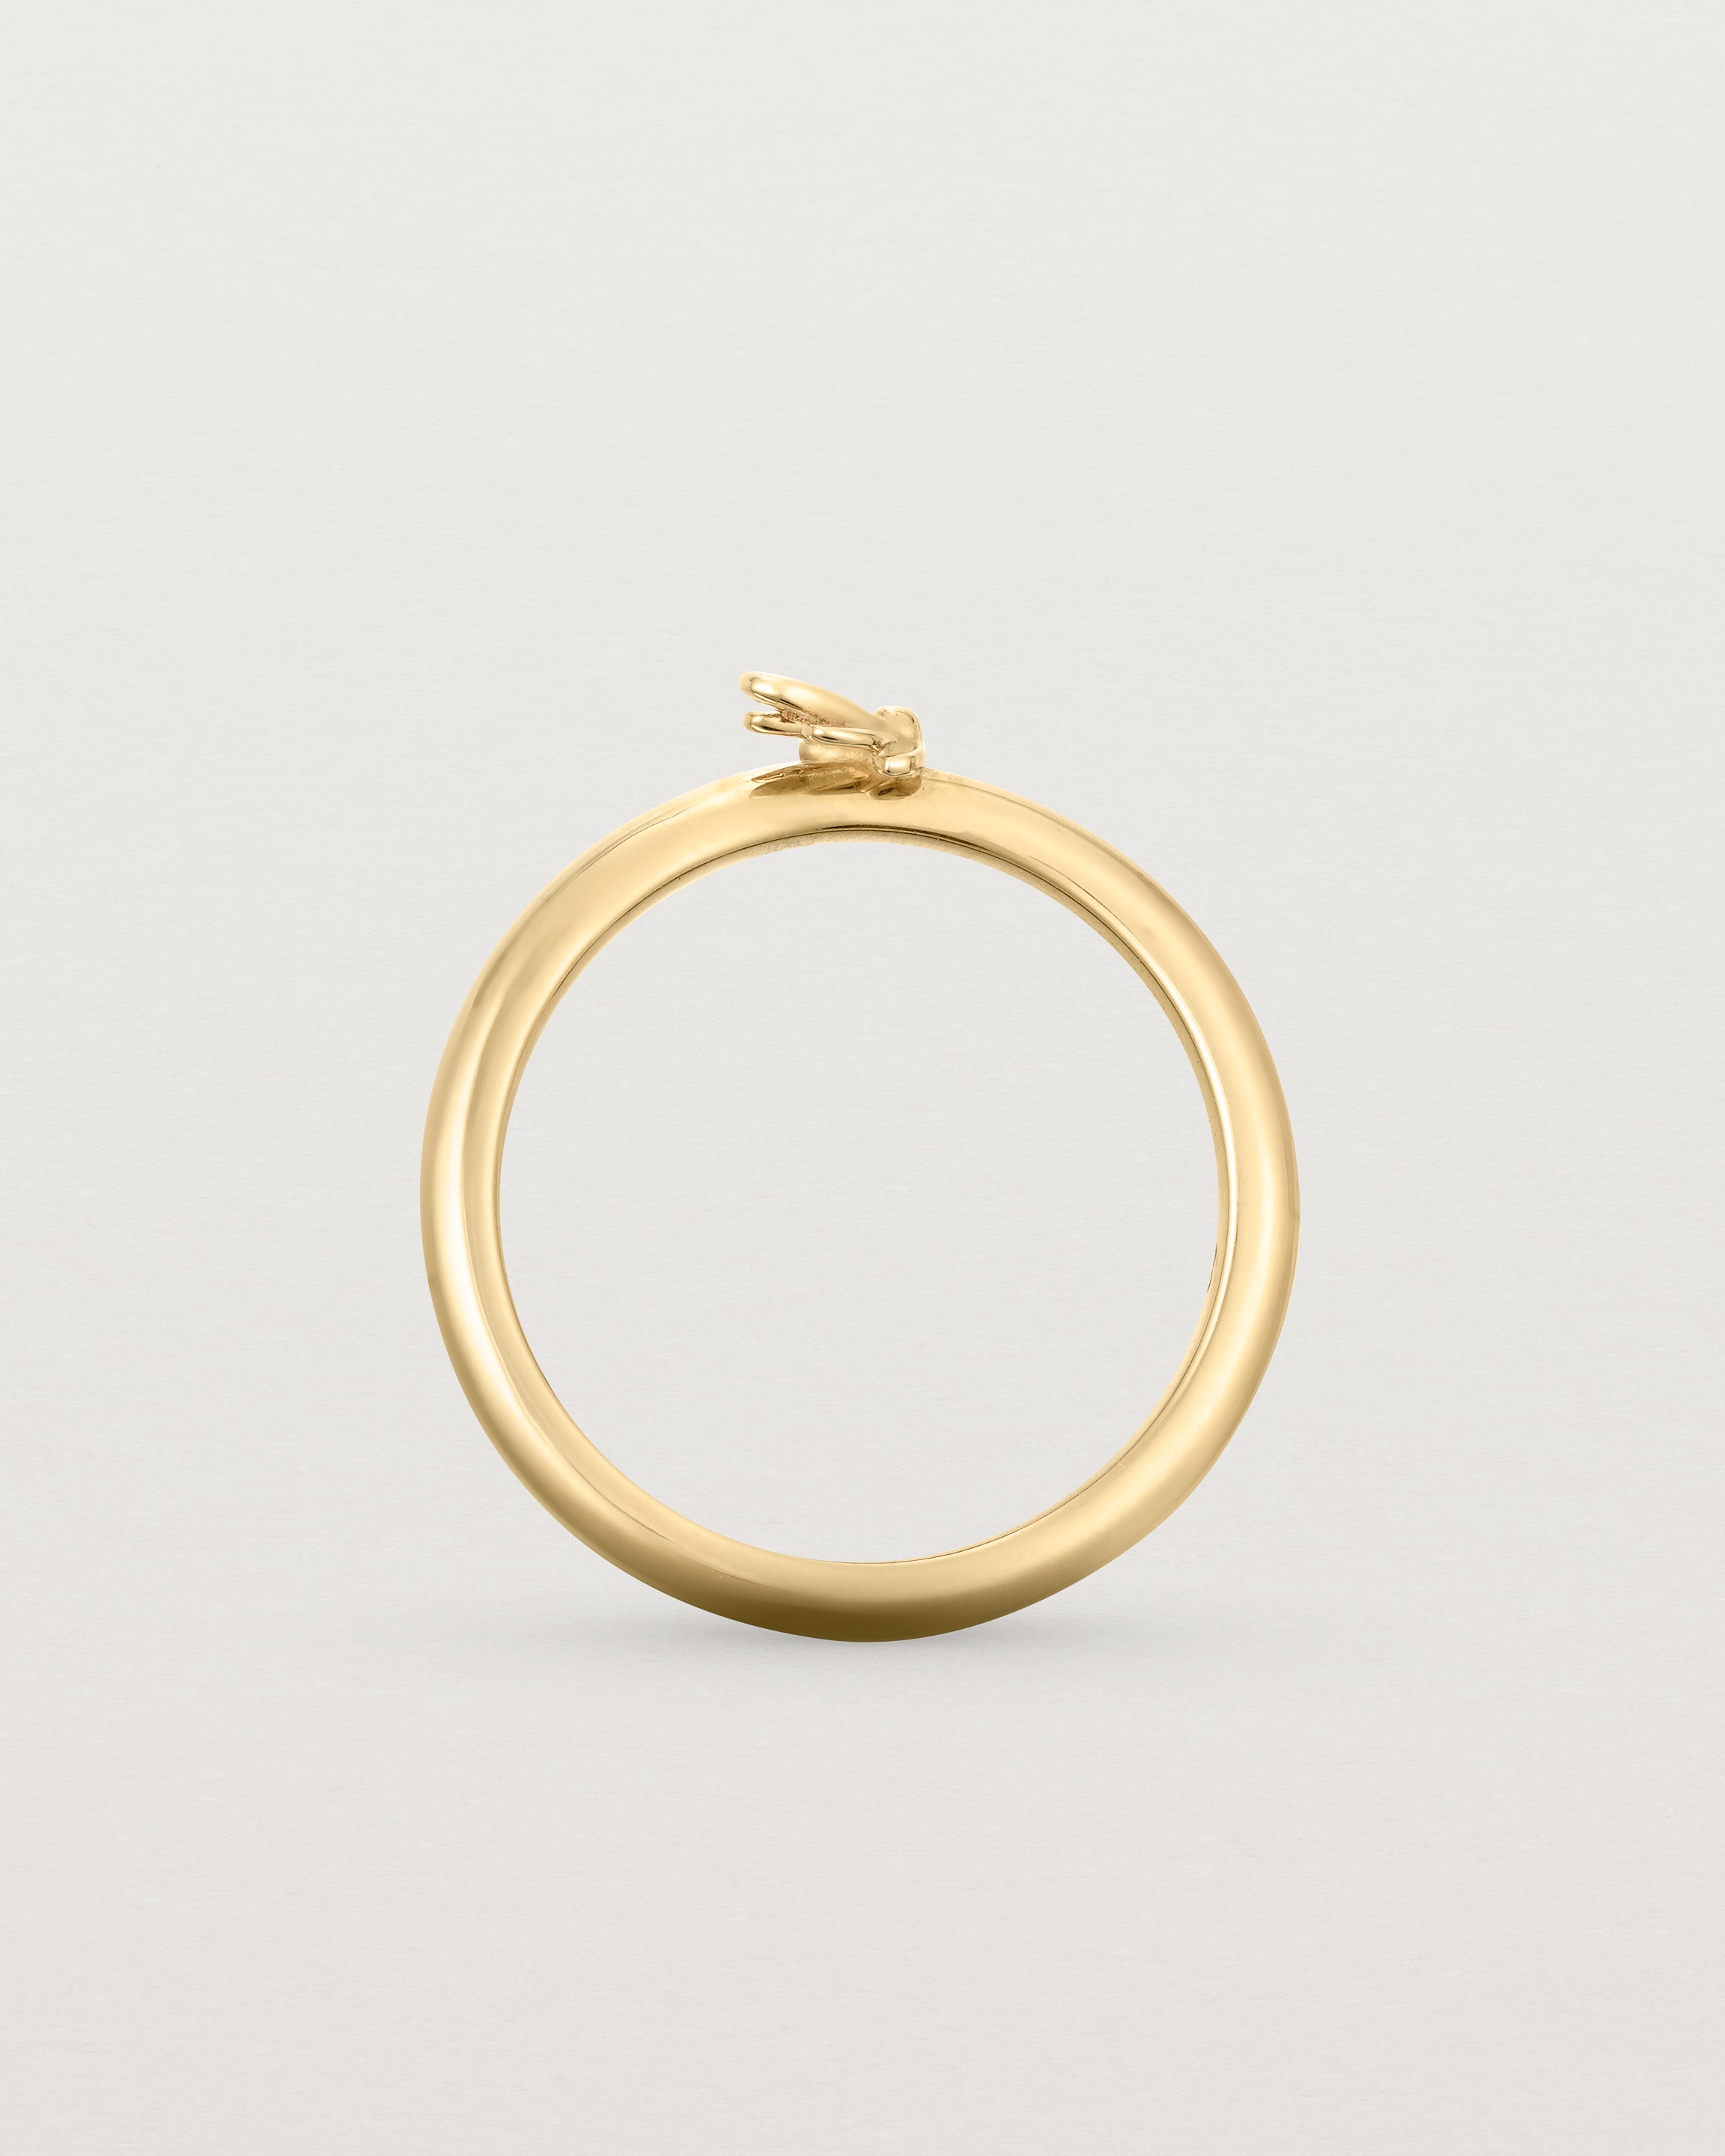 Standing view of the Aeris Stacking Ring in yellow gold.